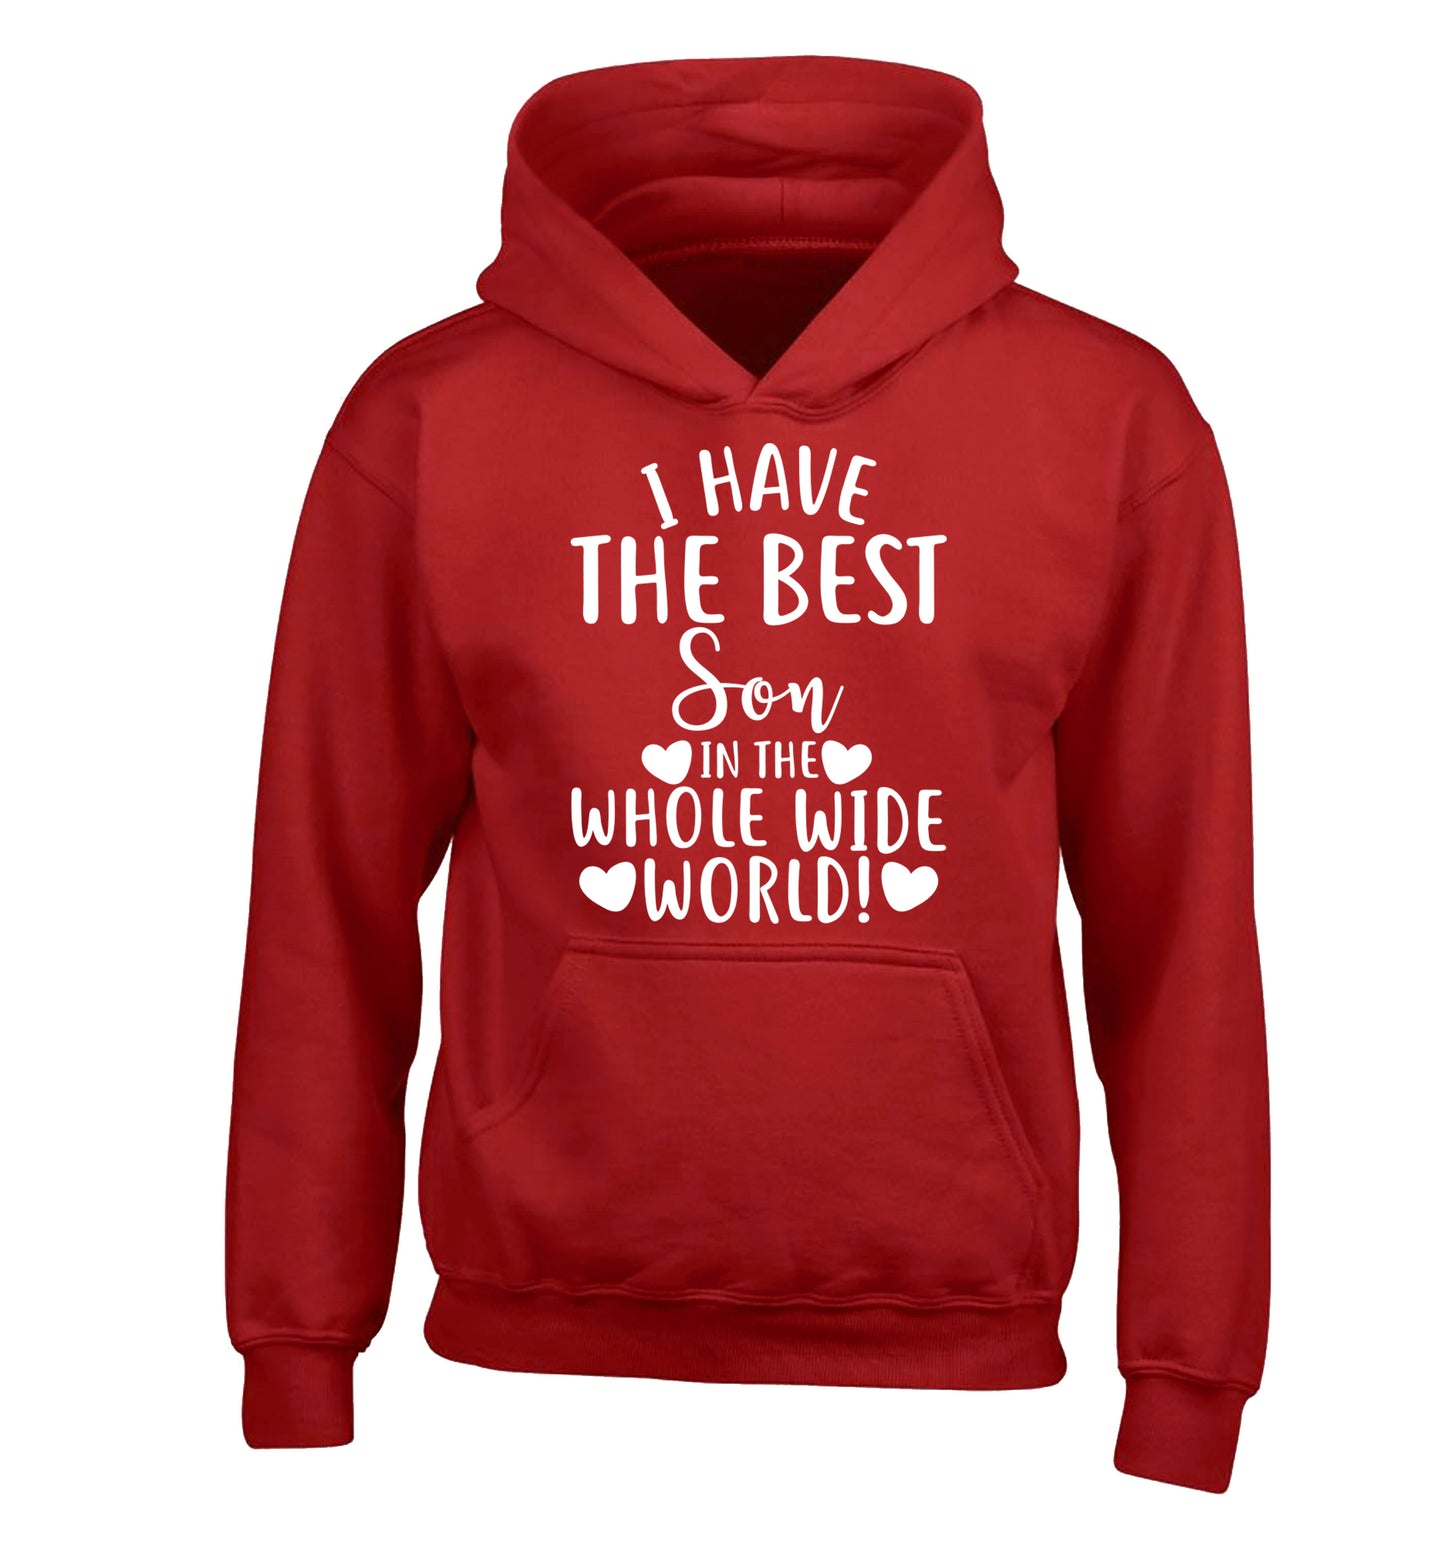 I have the best son in the whole wide world! children's red hoodie 12-13 Years